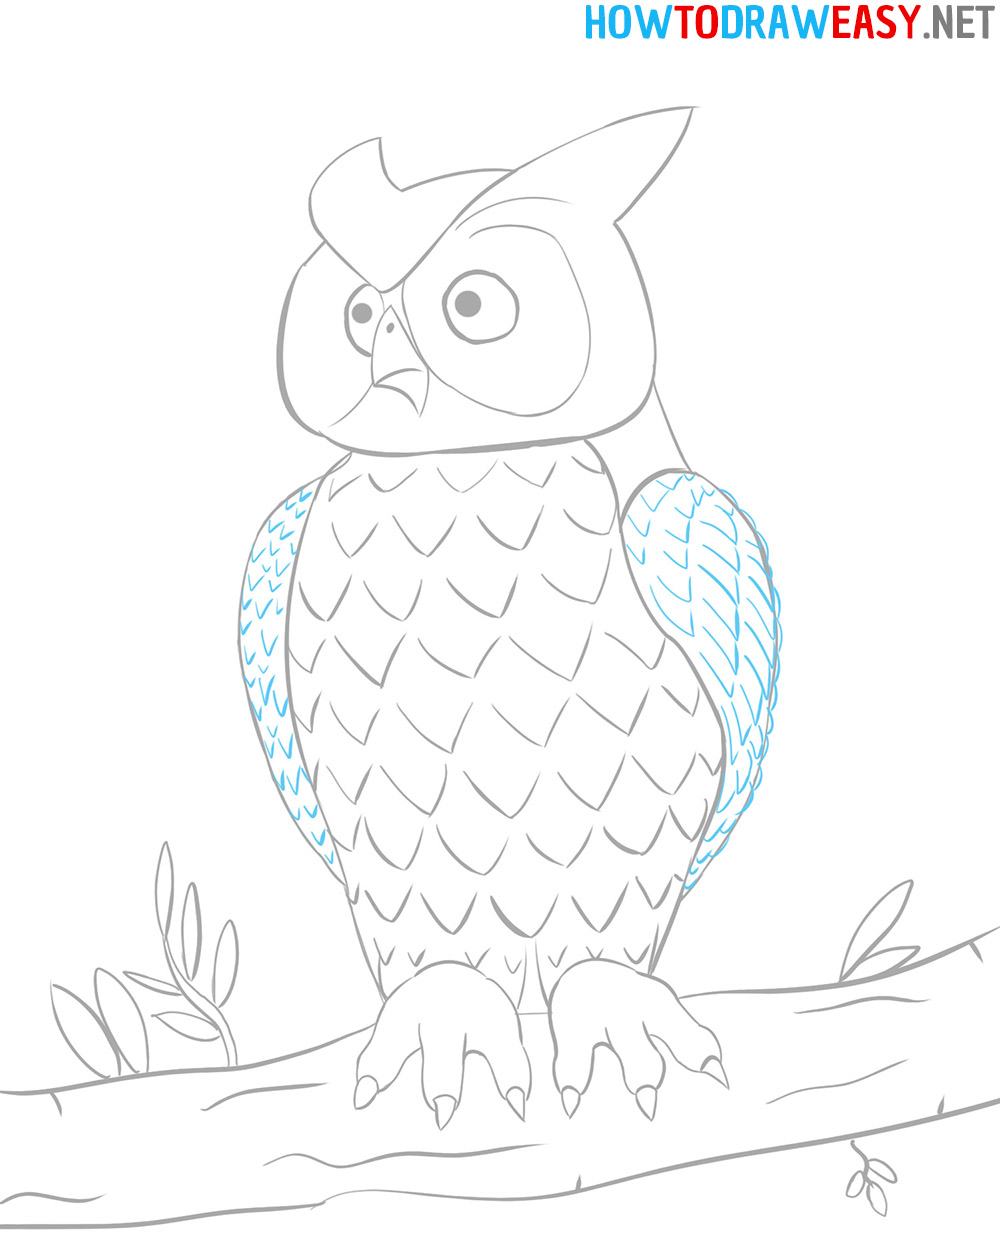 How to Sketch an Owl